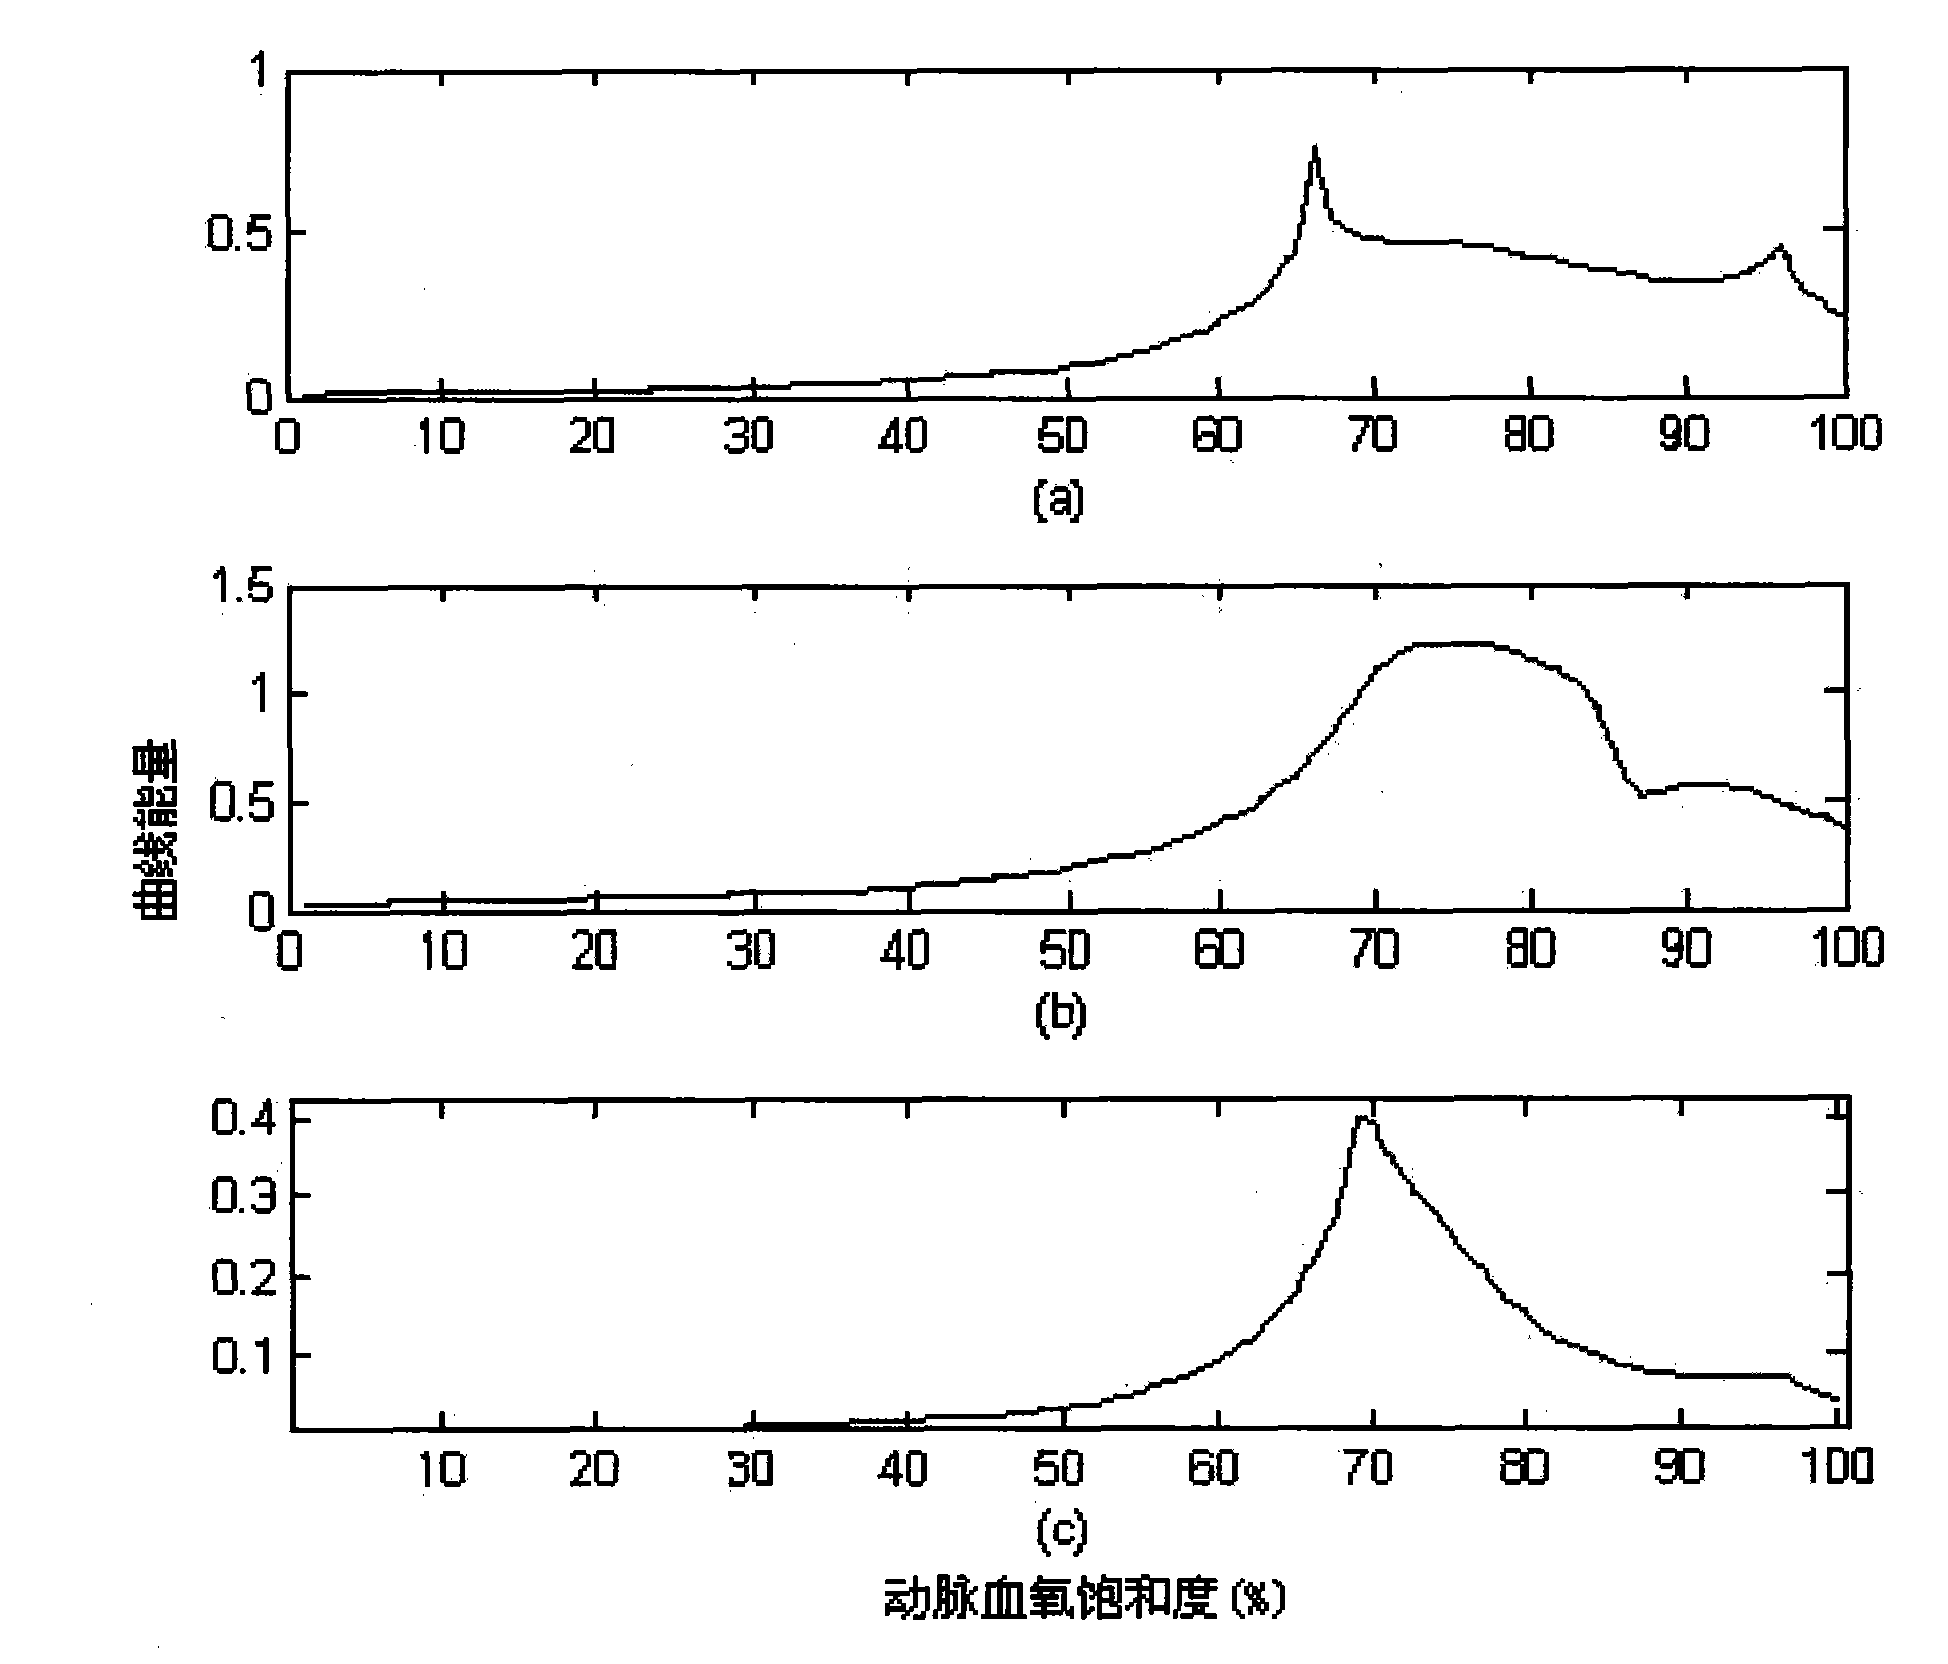 Measurement method of blood oxygen saturation for eliminating motion interference